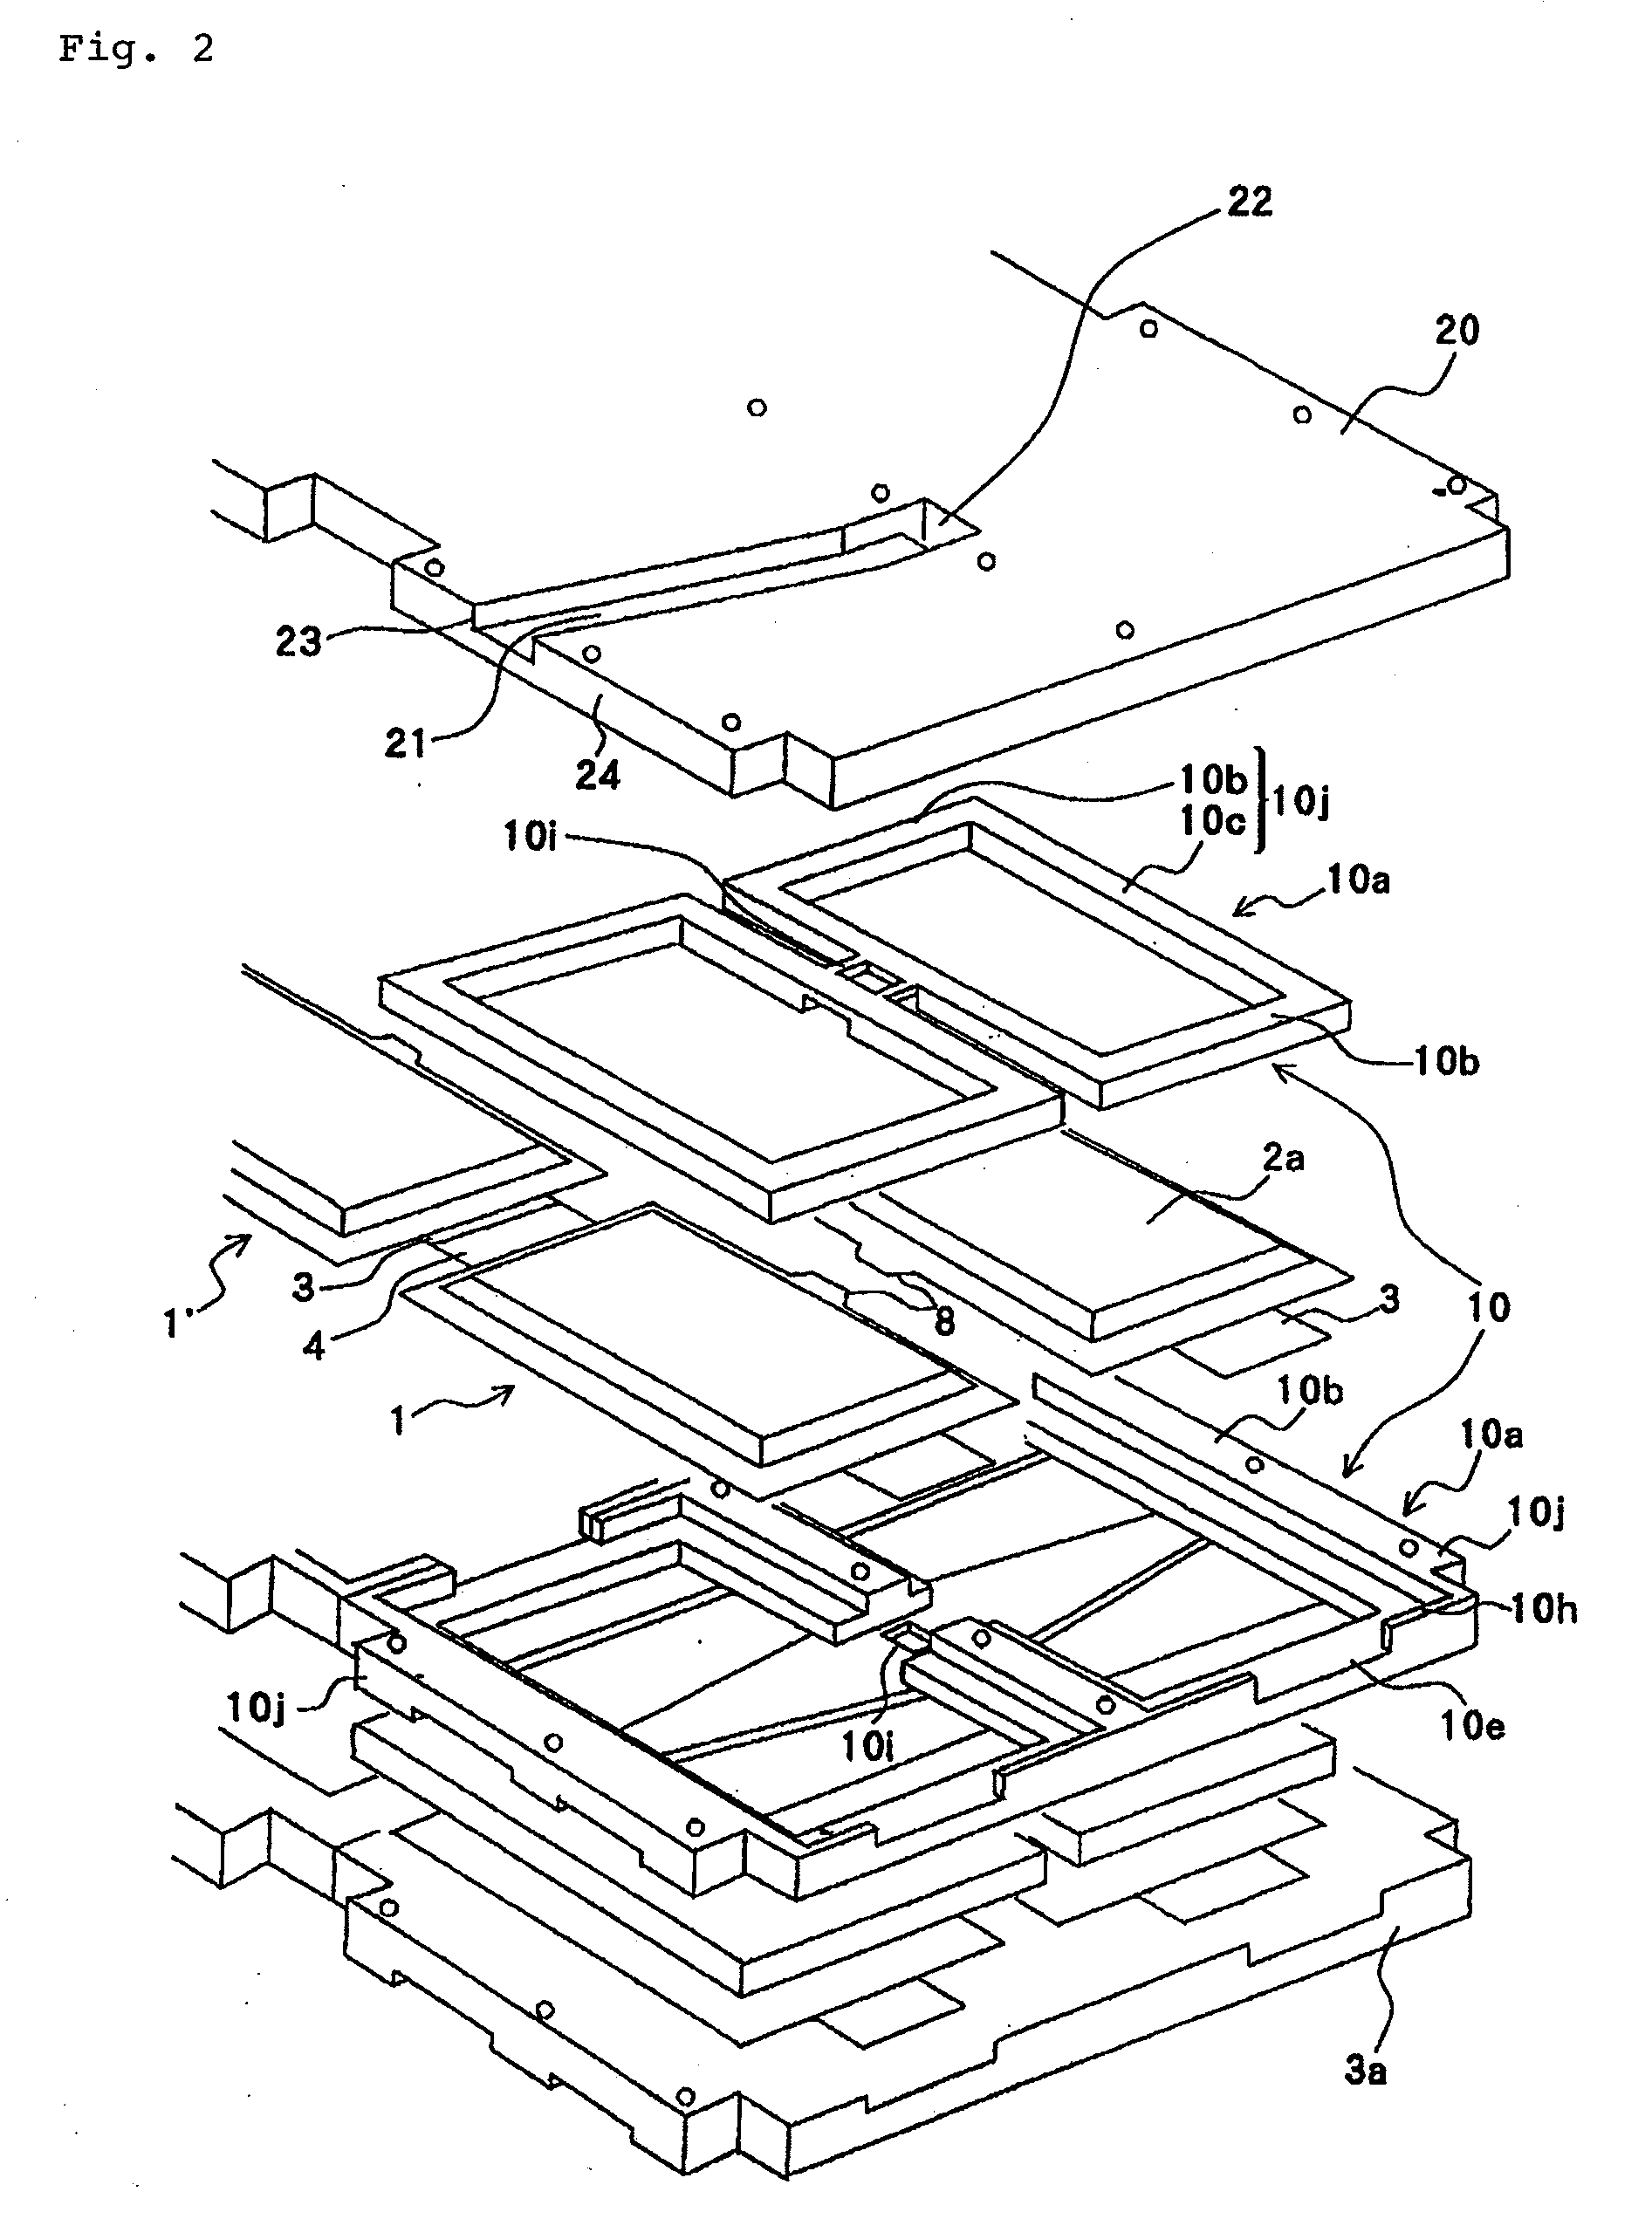 Film-covered electrical device packaging system